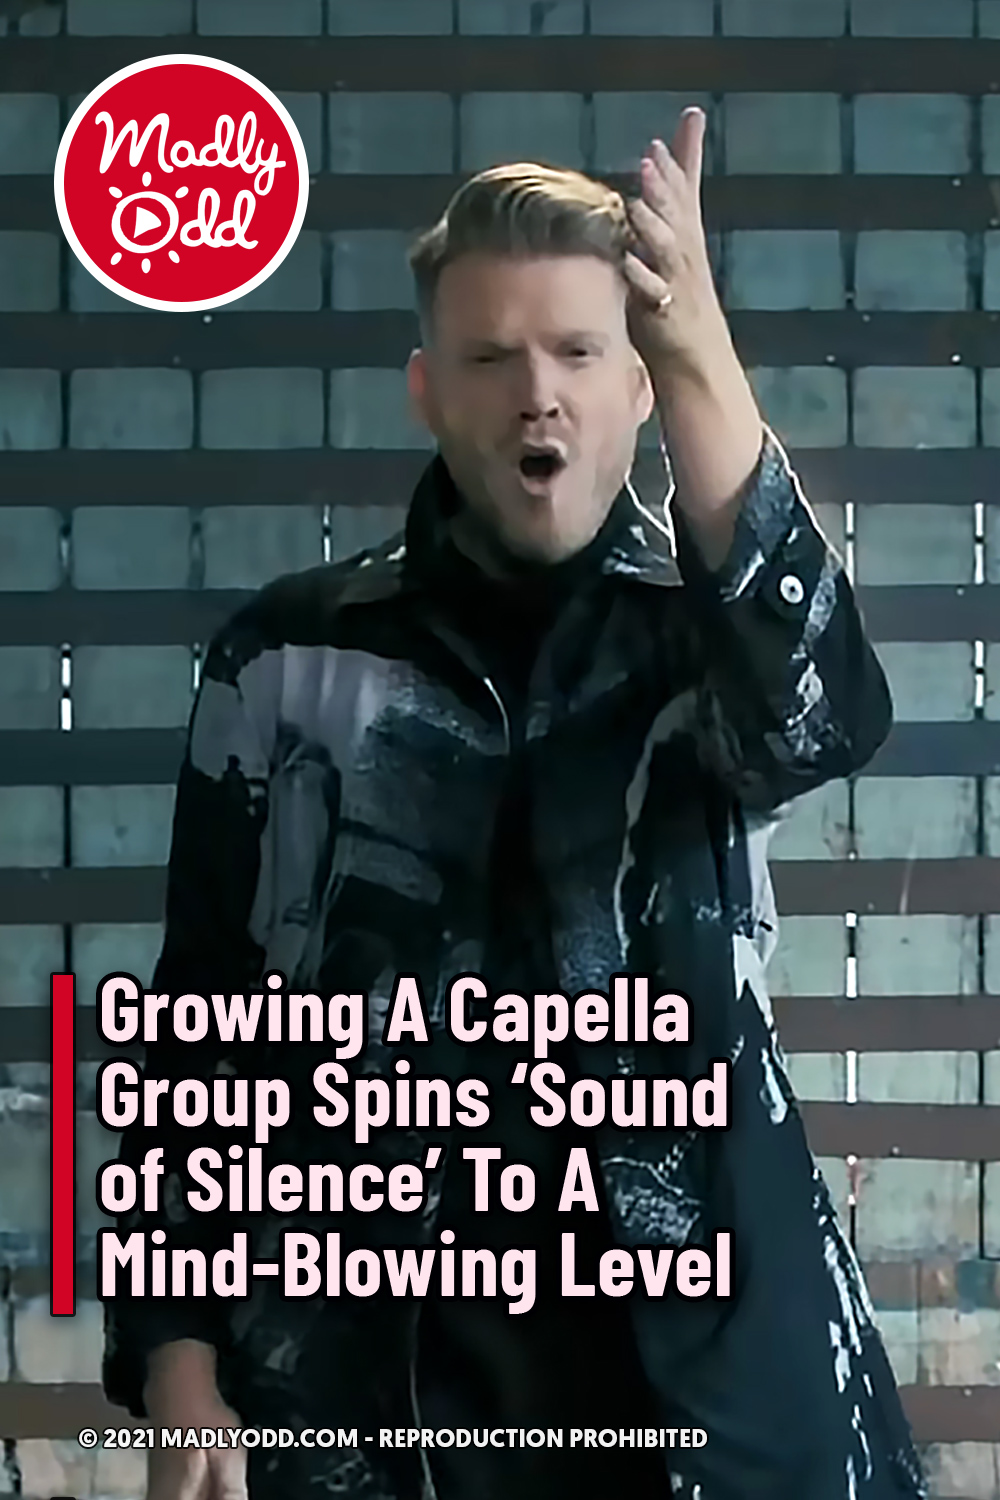 Growing A Capella Group Spins ‘Sound of Silence’ To A Mind-Blowing Level